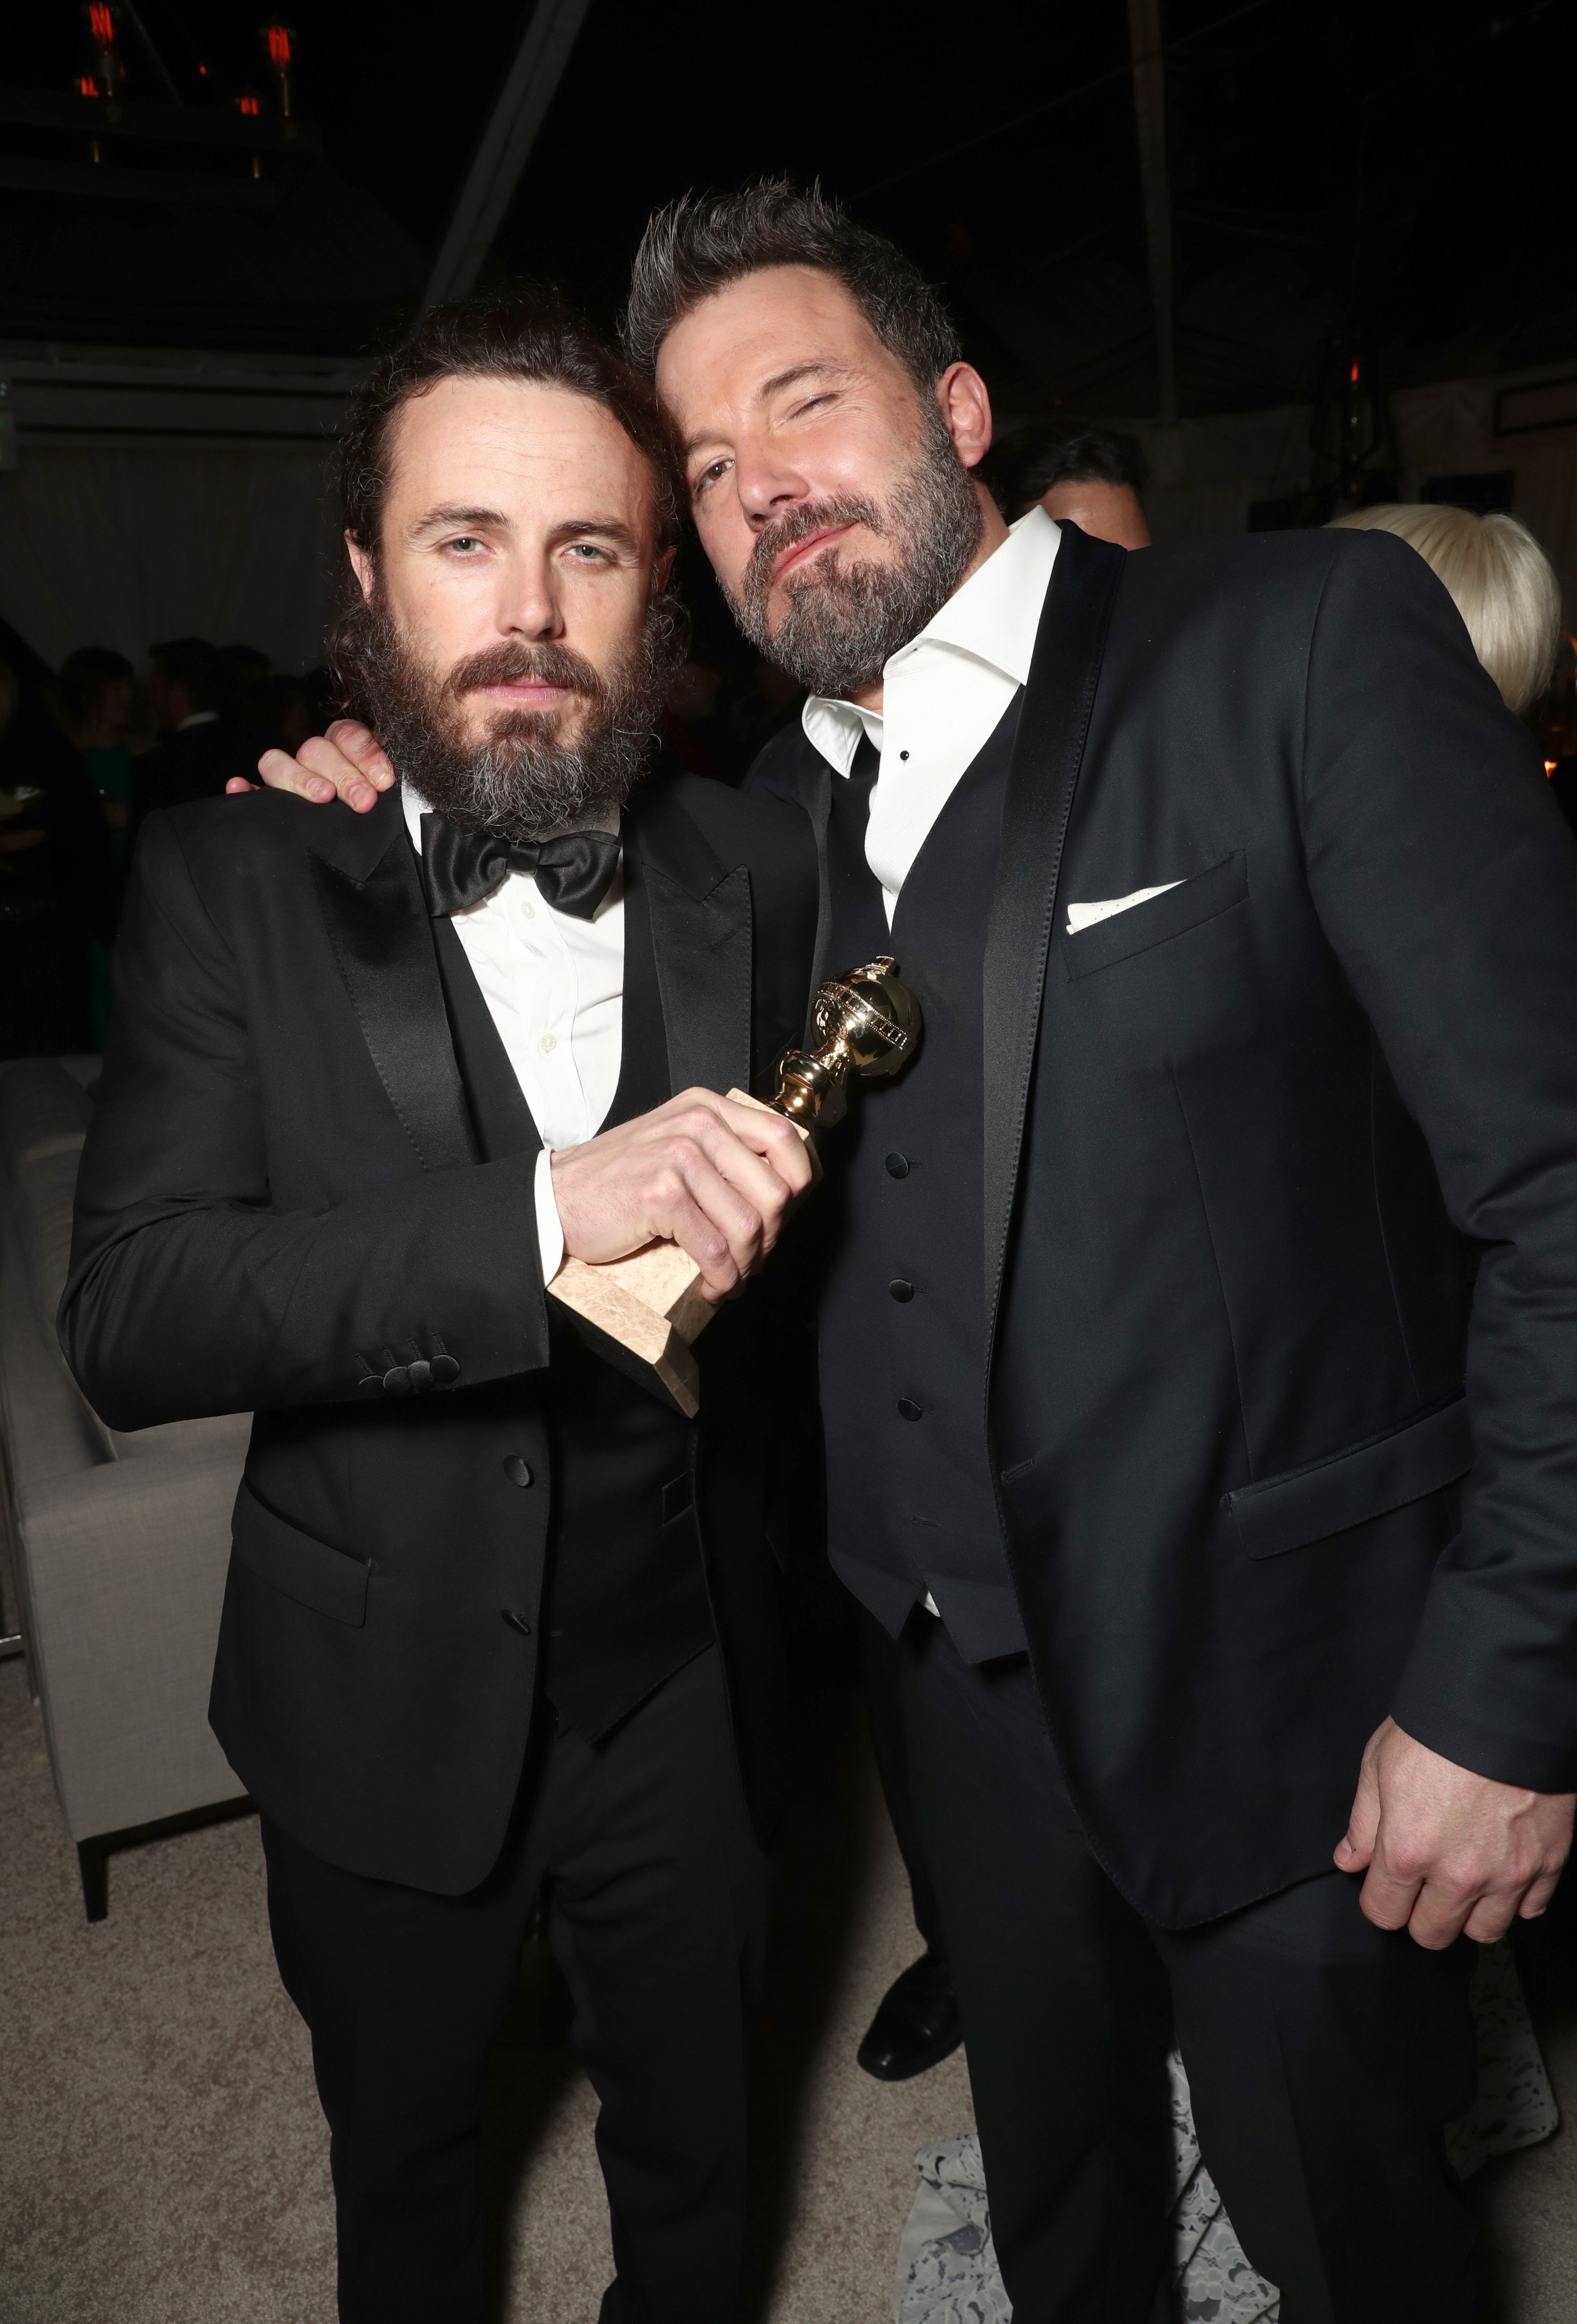 Casey Affleck and Ben Affleck in Beverly Hills, California on January 8, 2017 | Source: Getty Images